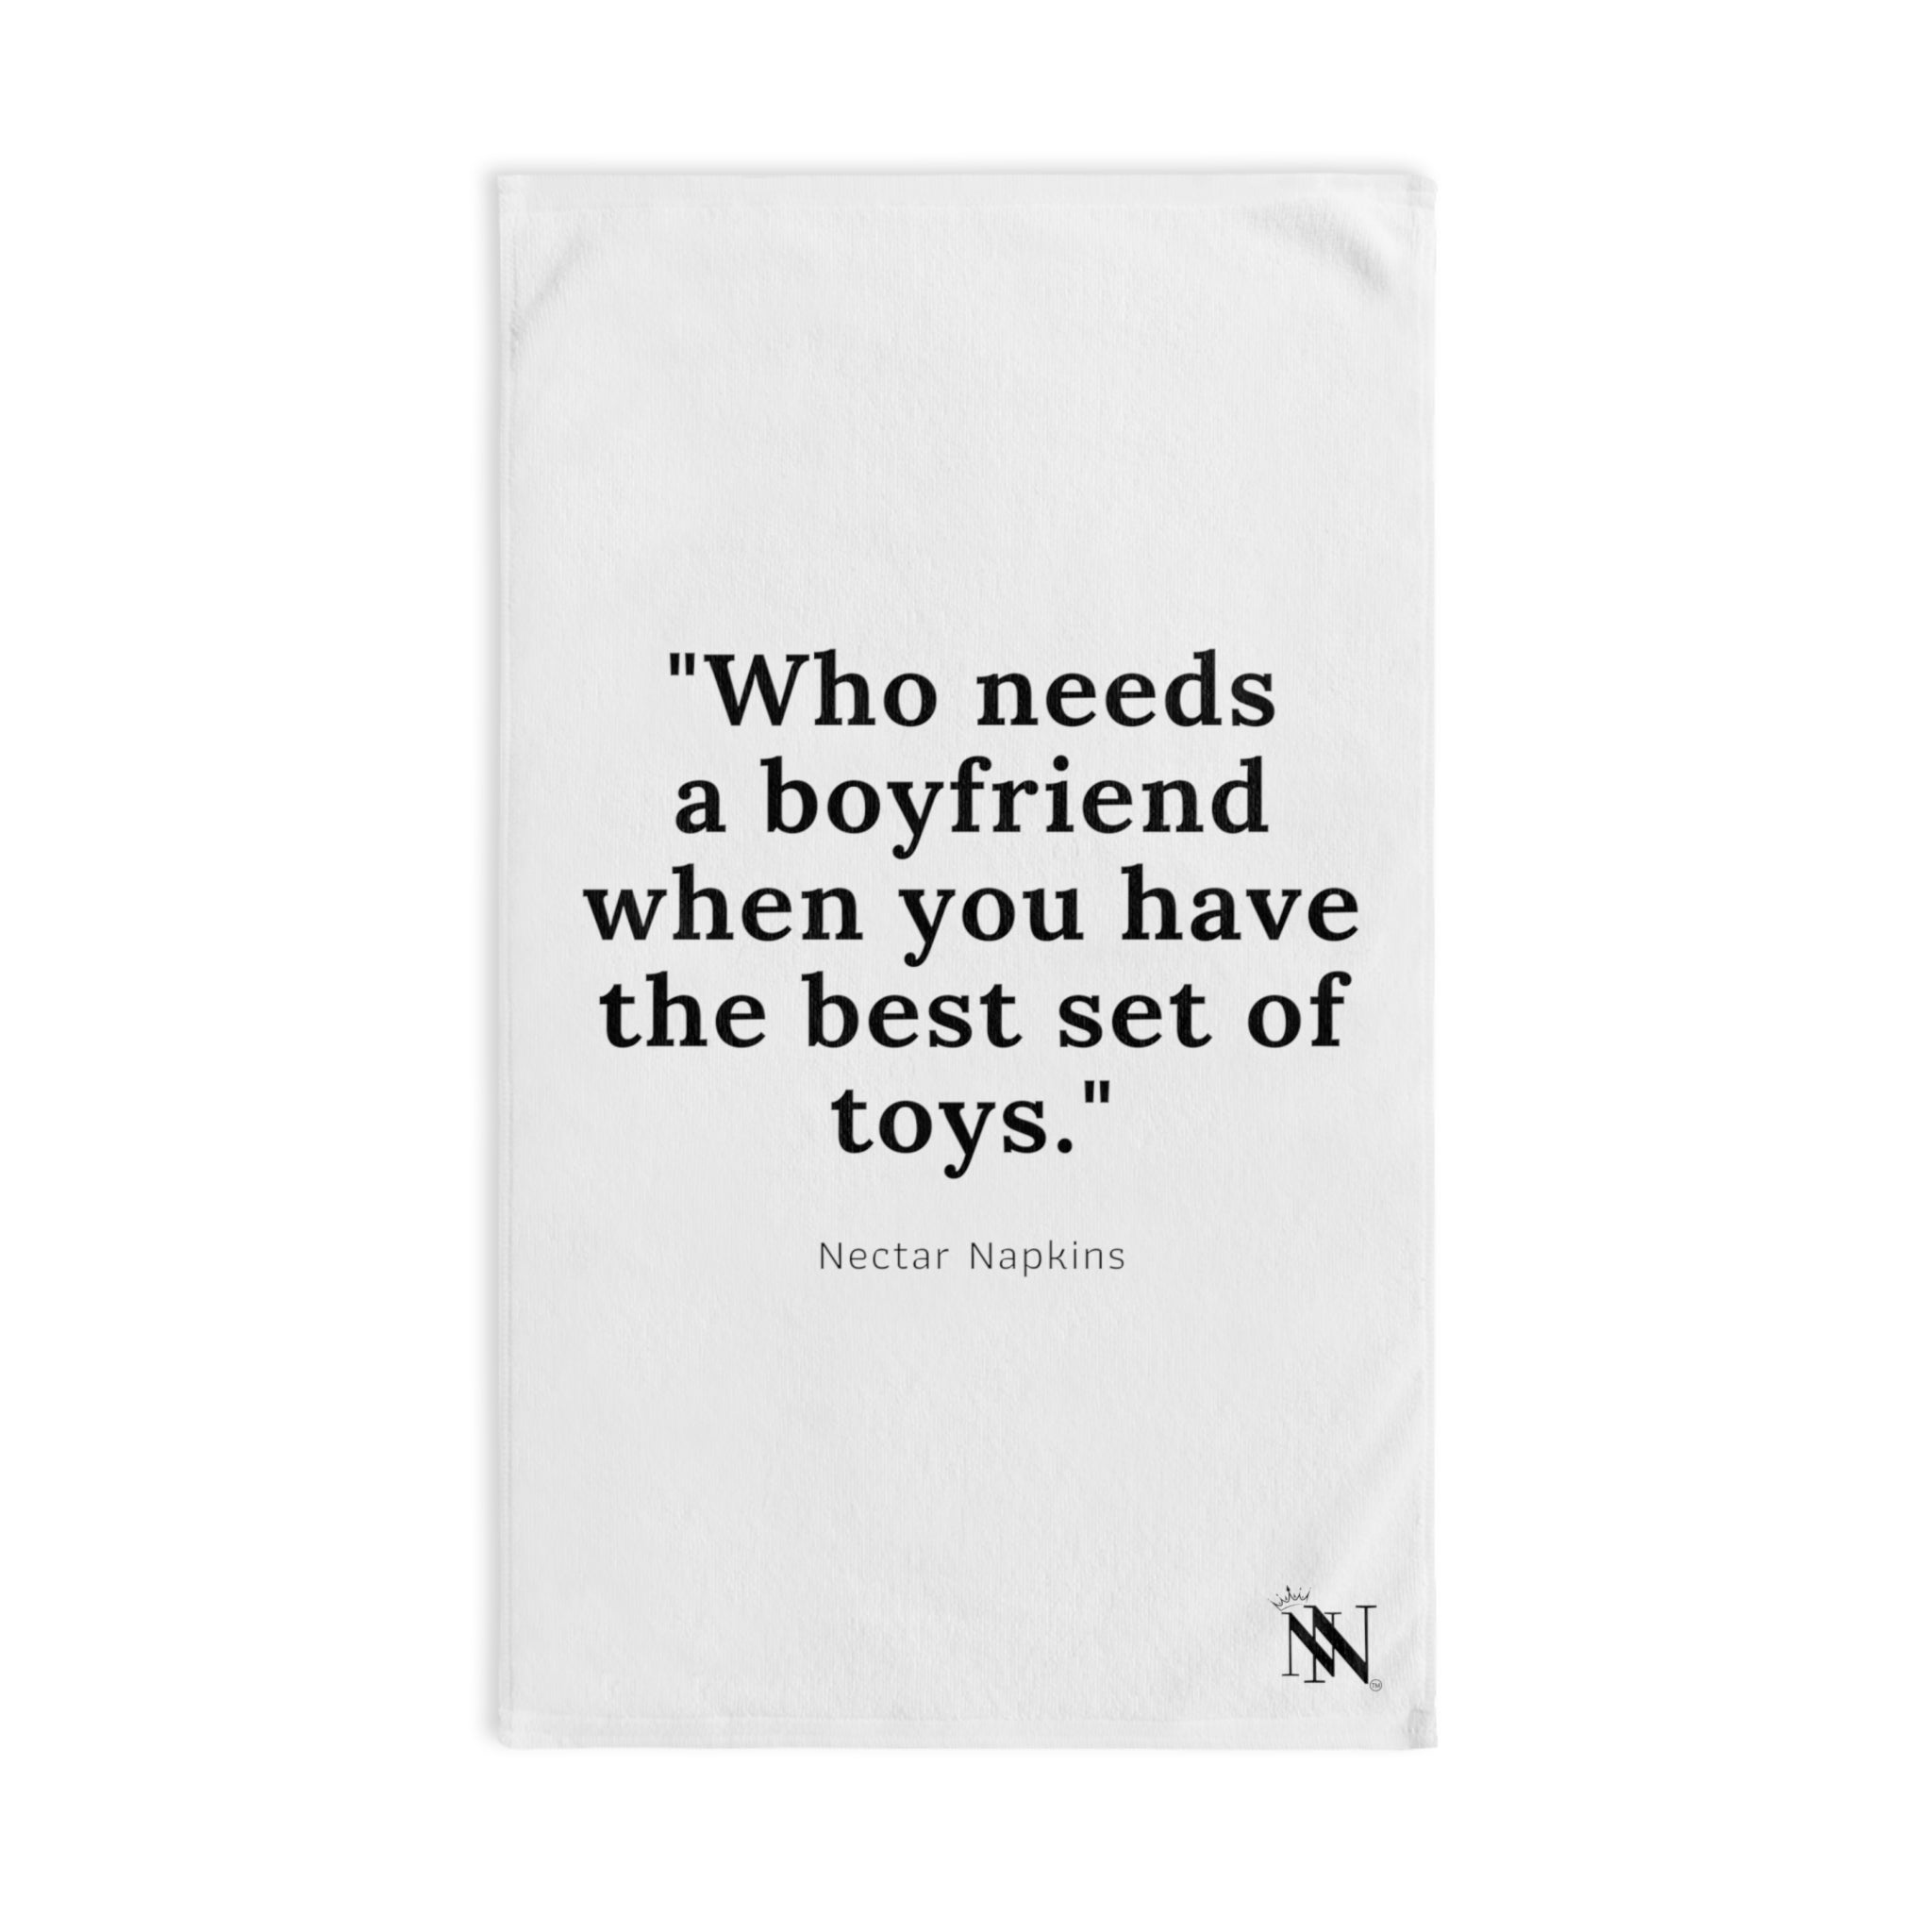 Boyfriend Toys White | Funny Gifts for Men - Gifts for Him - Birthday Gifts for Men, Him, Her, Husband, Boyfriend, Girlfriend, New Couple Gifts, Fathers & Valentines Day Gifts, Christmas Gifts NECTAR NAPKINS